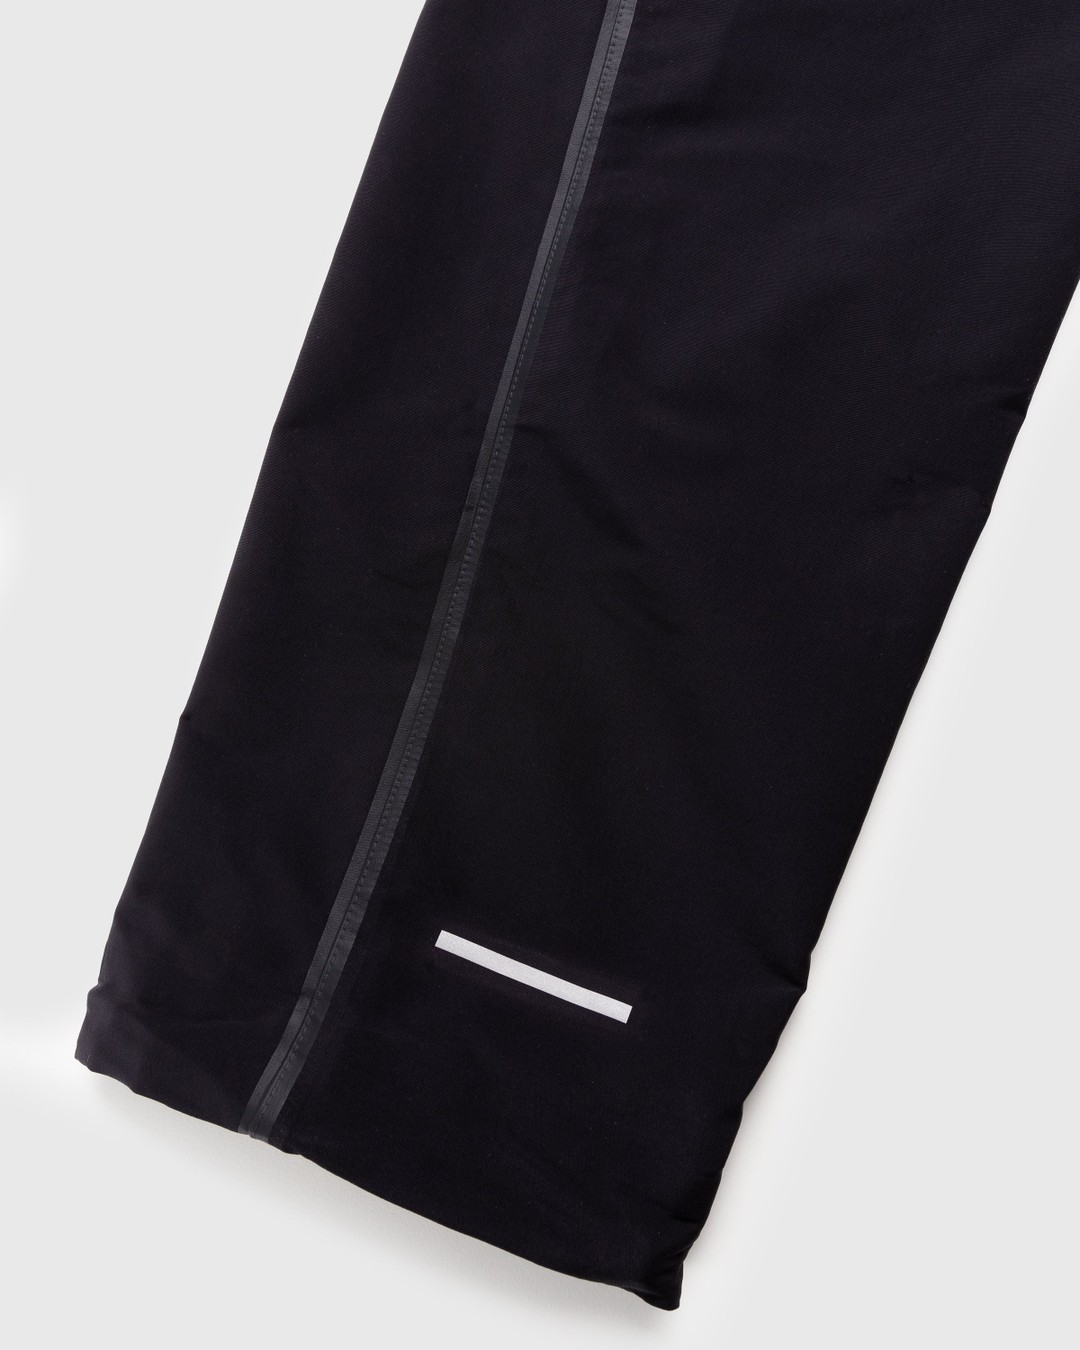 The North Face – RMST Mountain Pant Black - Track Pants - Black - Image 3